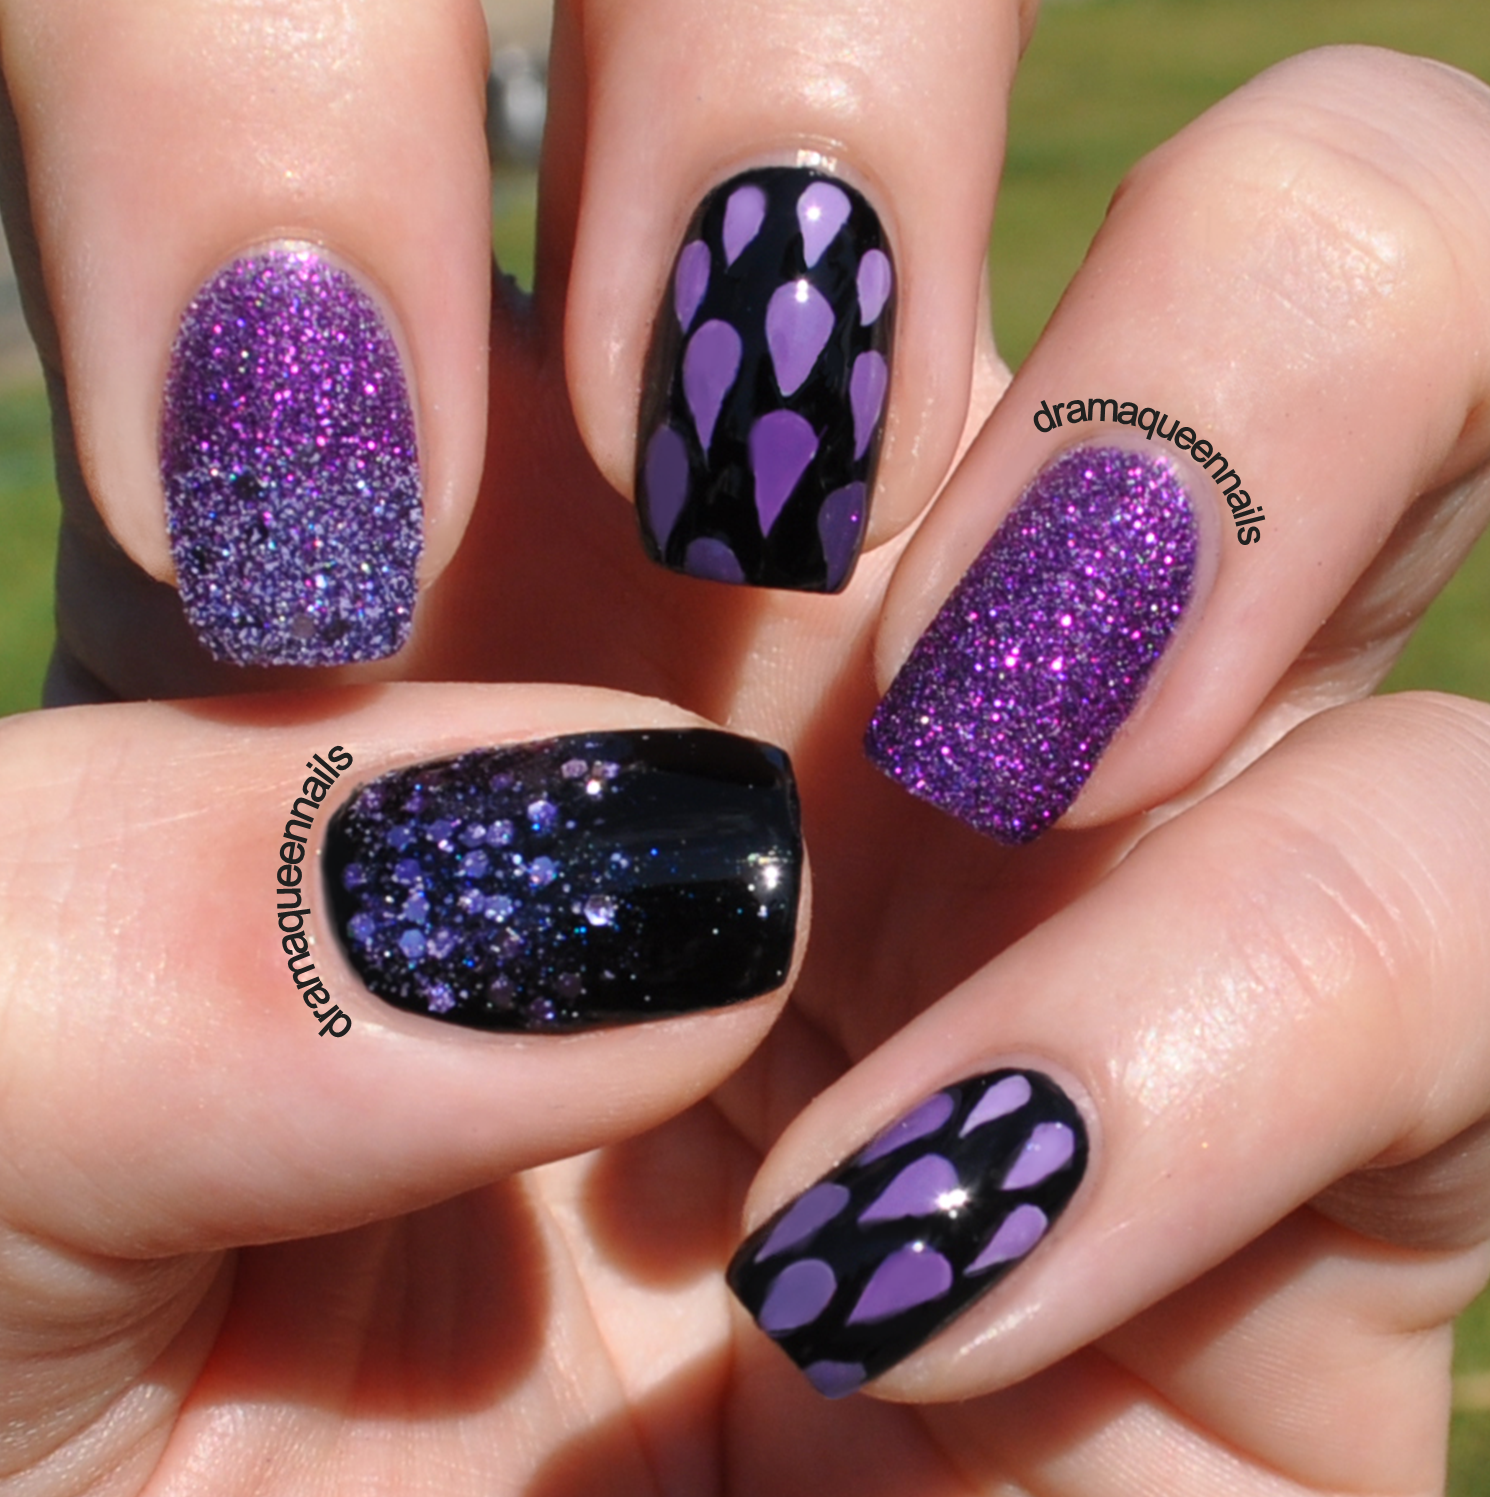 Drama Queen Nails: #31dc2013 - Day 6: Violet